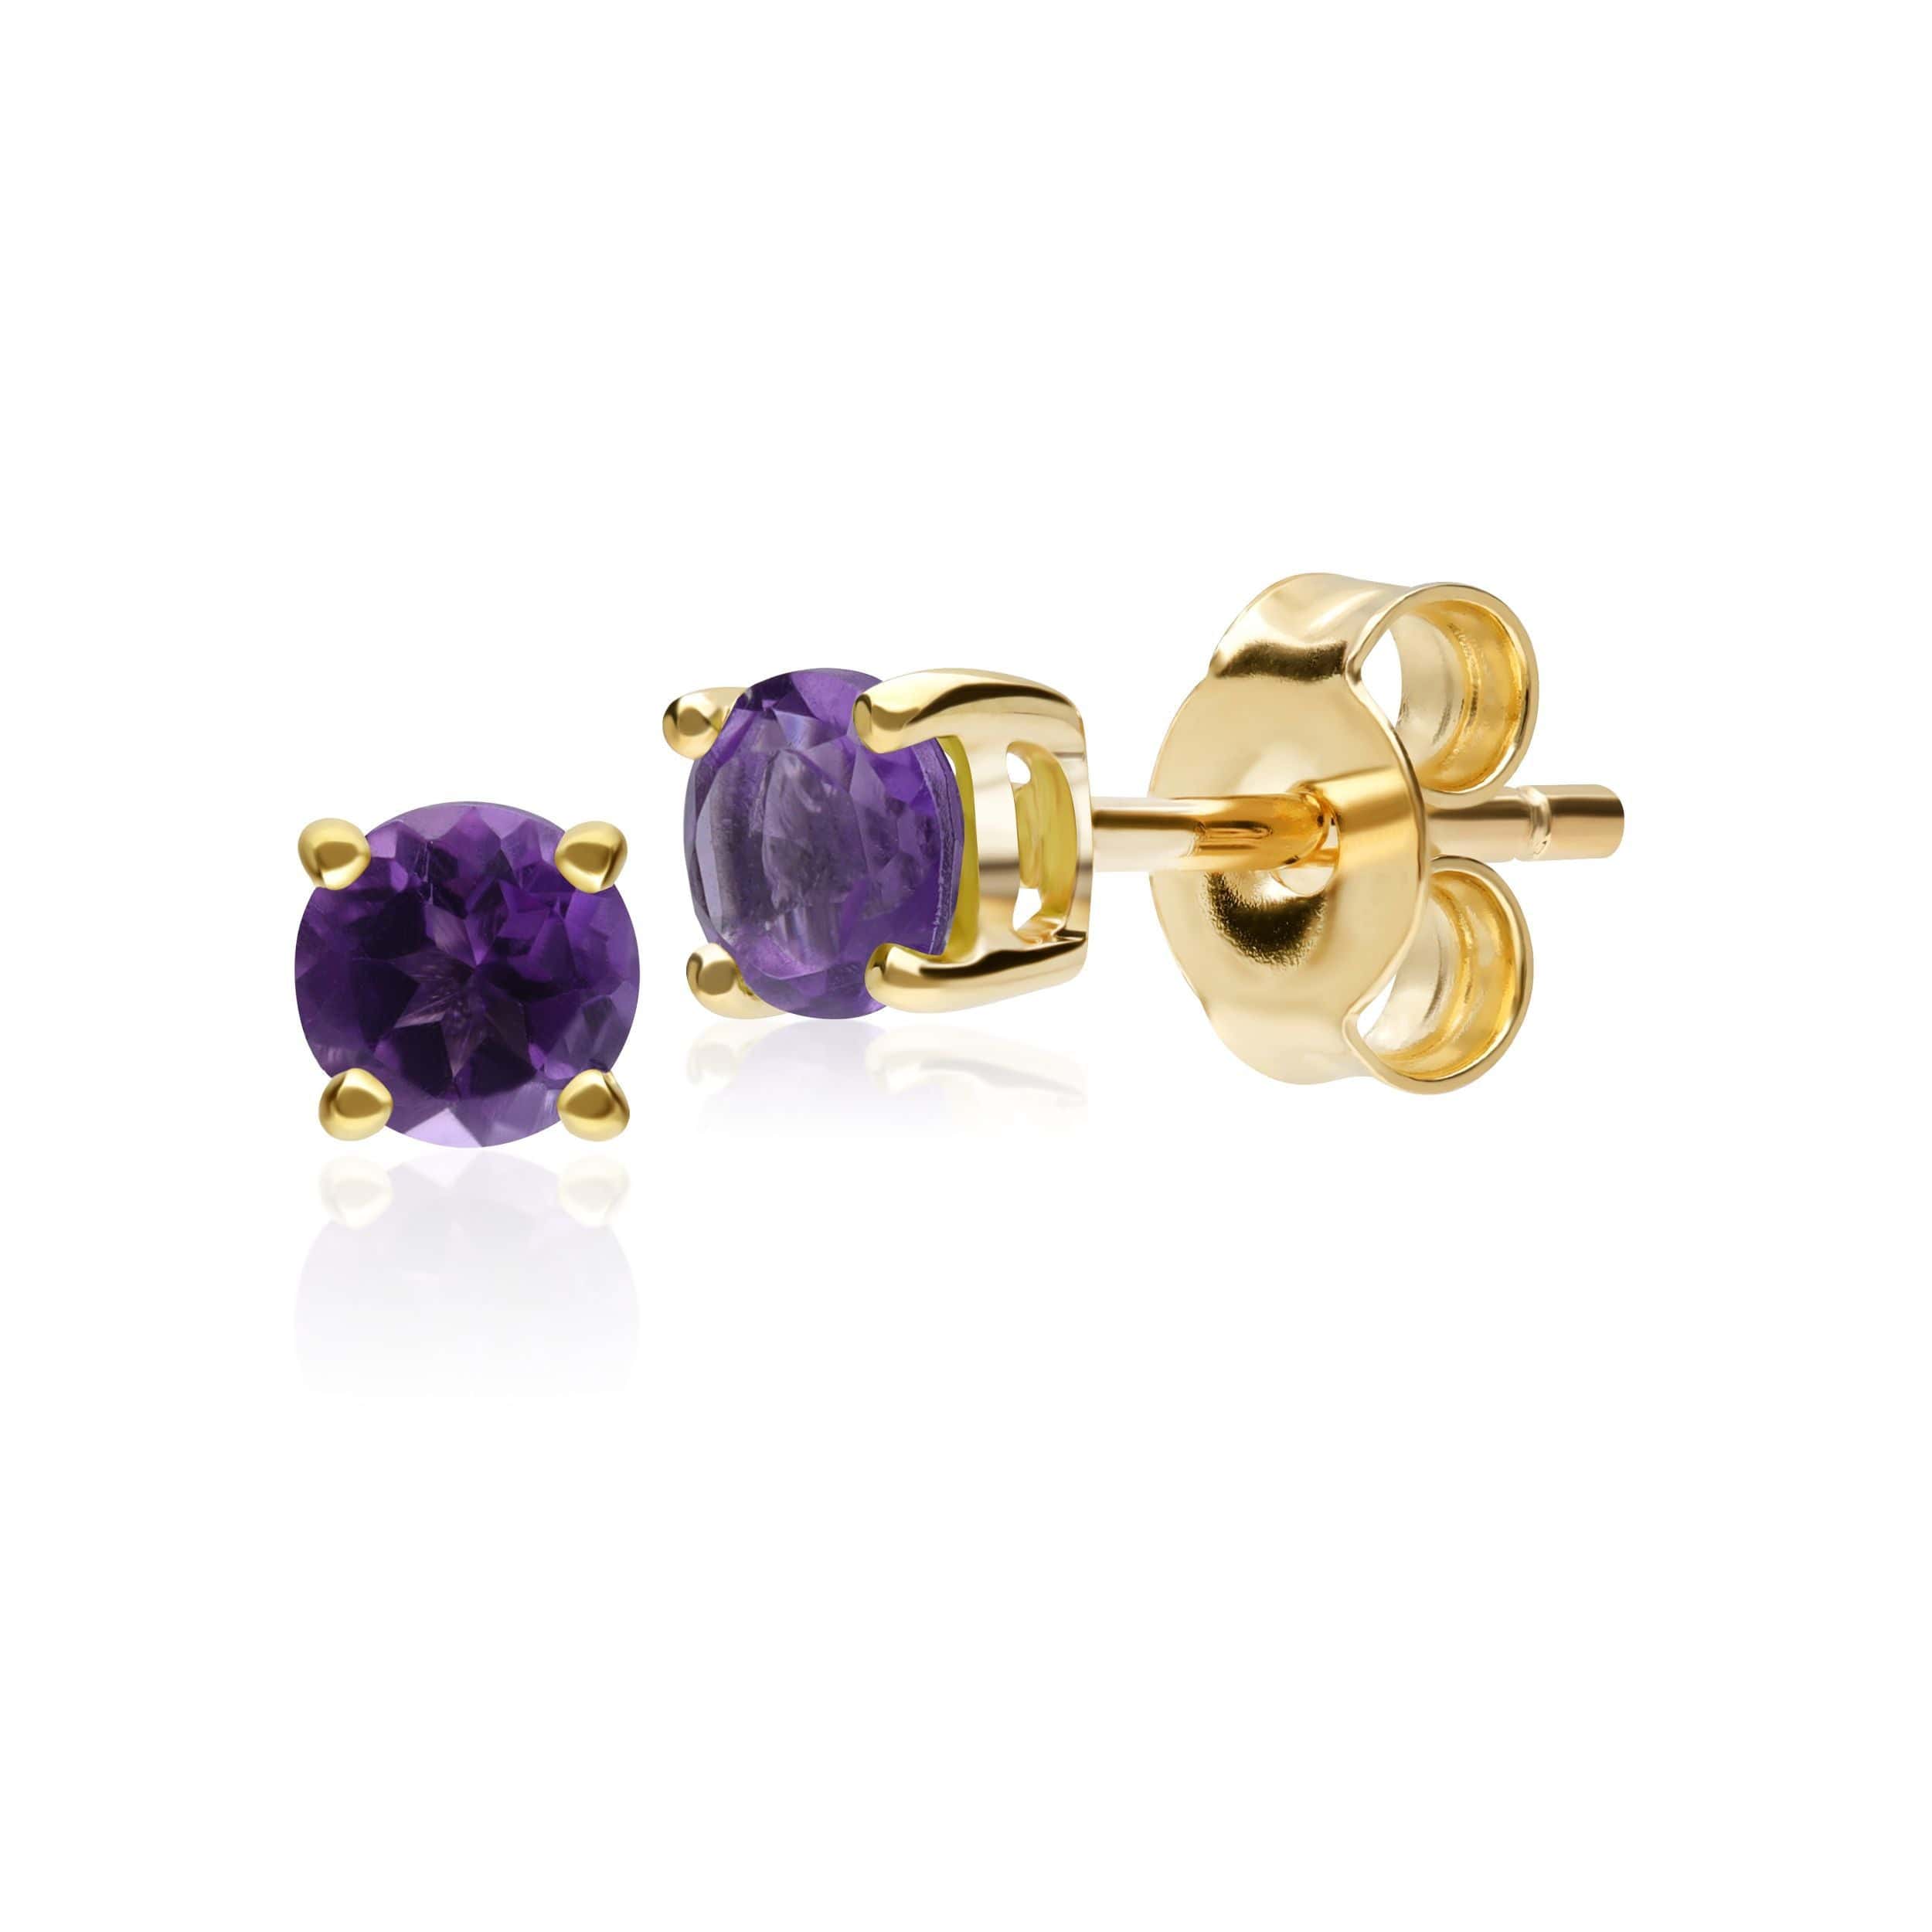 11560 Classic Round Amethyst Stud Earrings in 9ct Yellow Gold 1